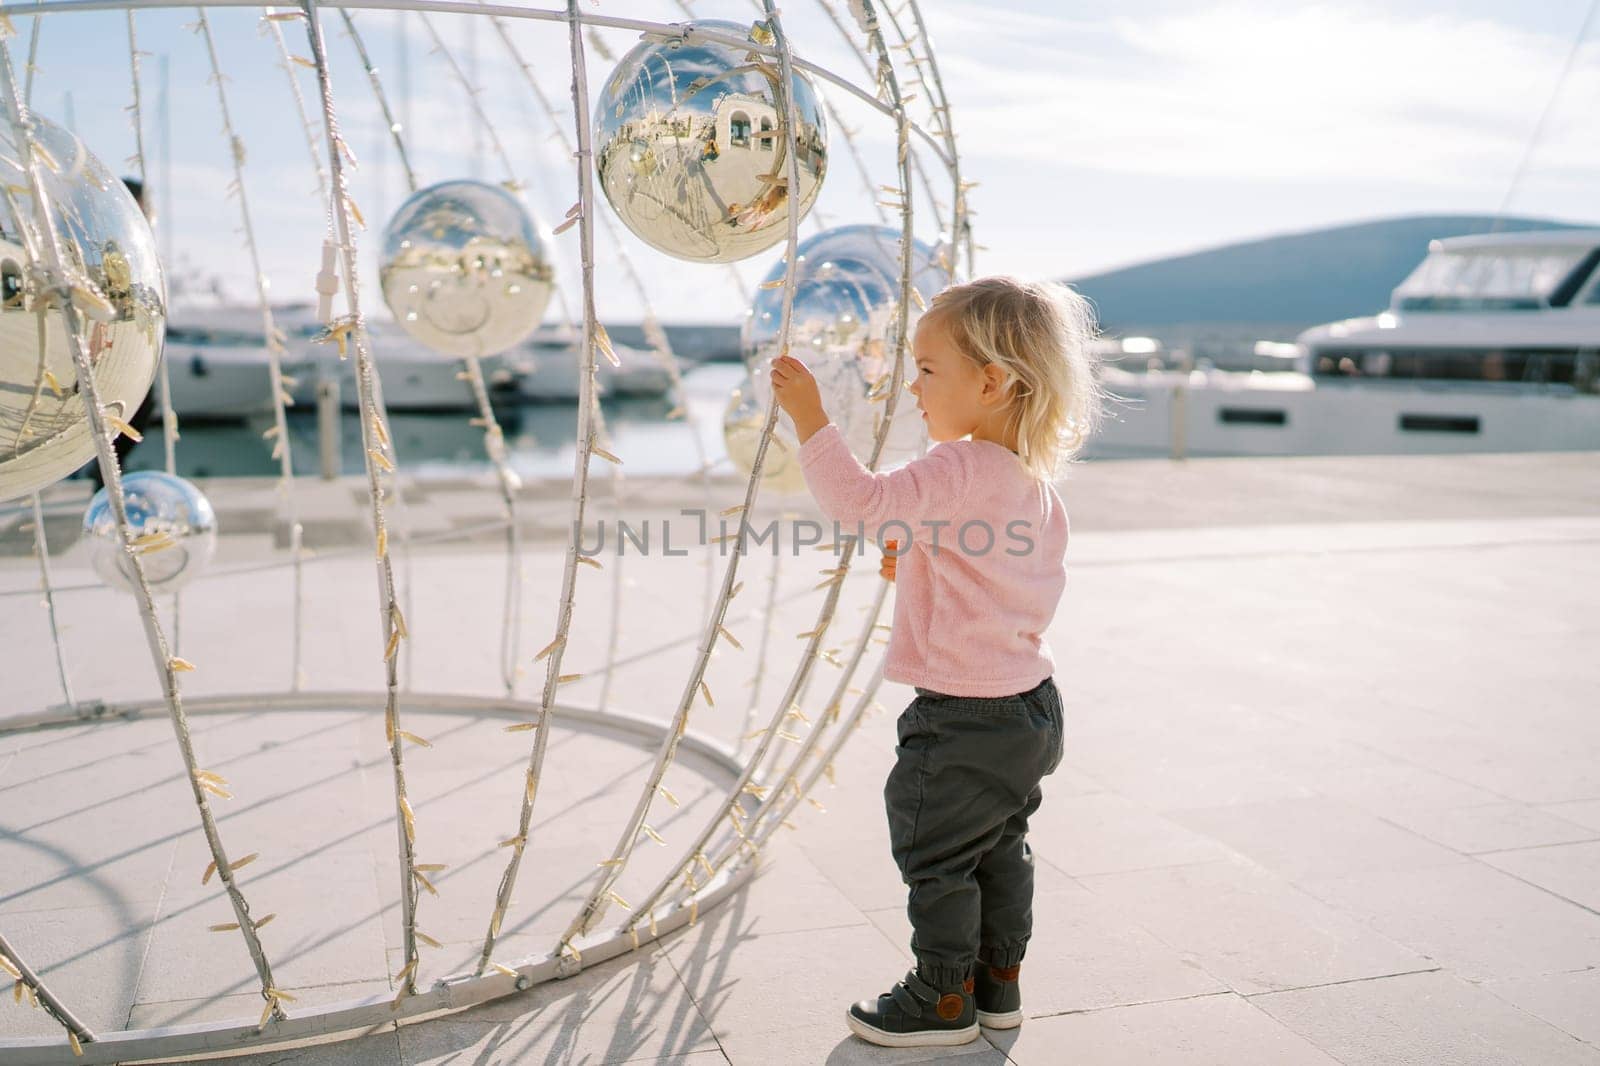 Little girl stands near a spherical Christmas installation with mirror balls by Nadtochiy